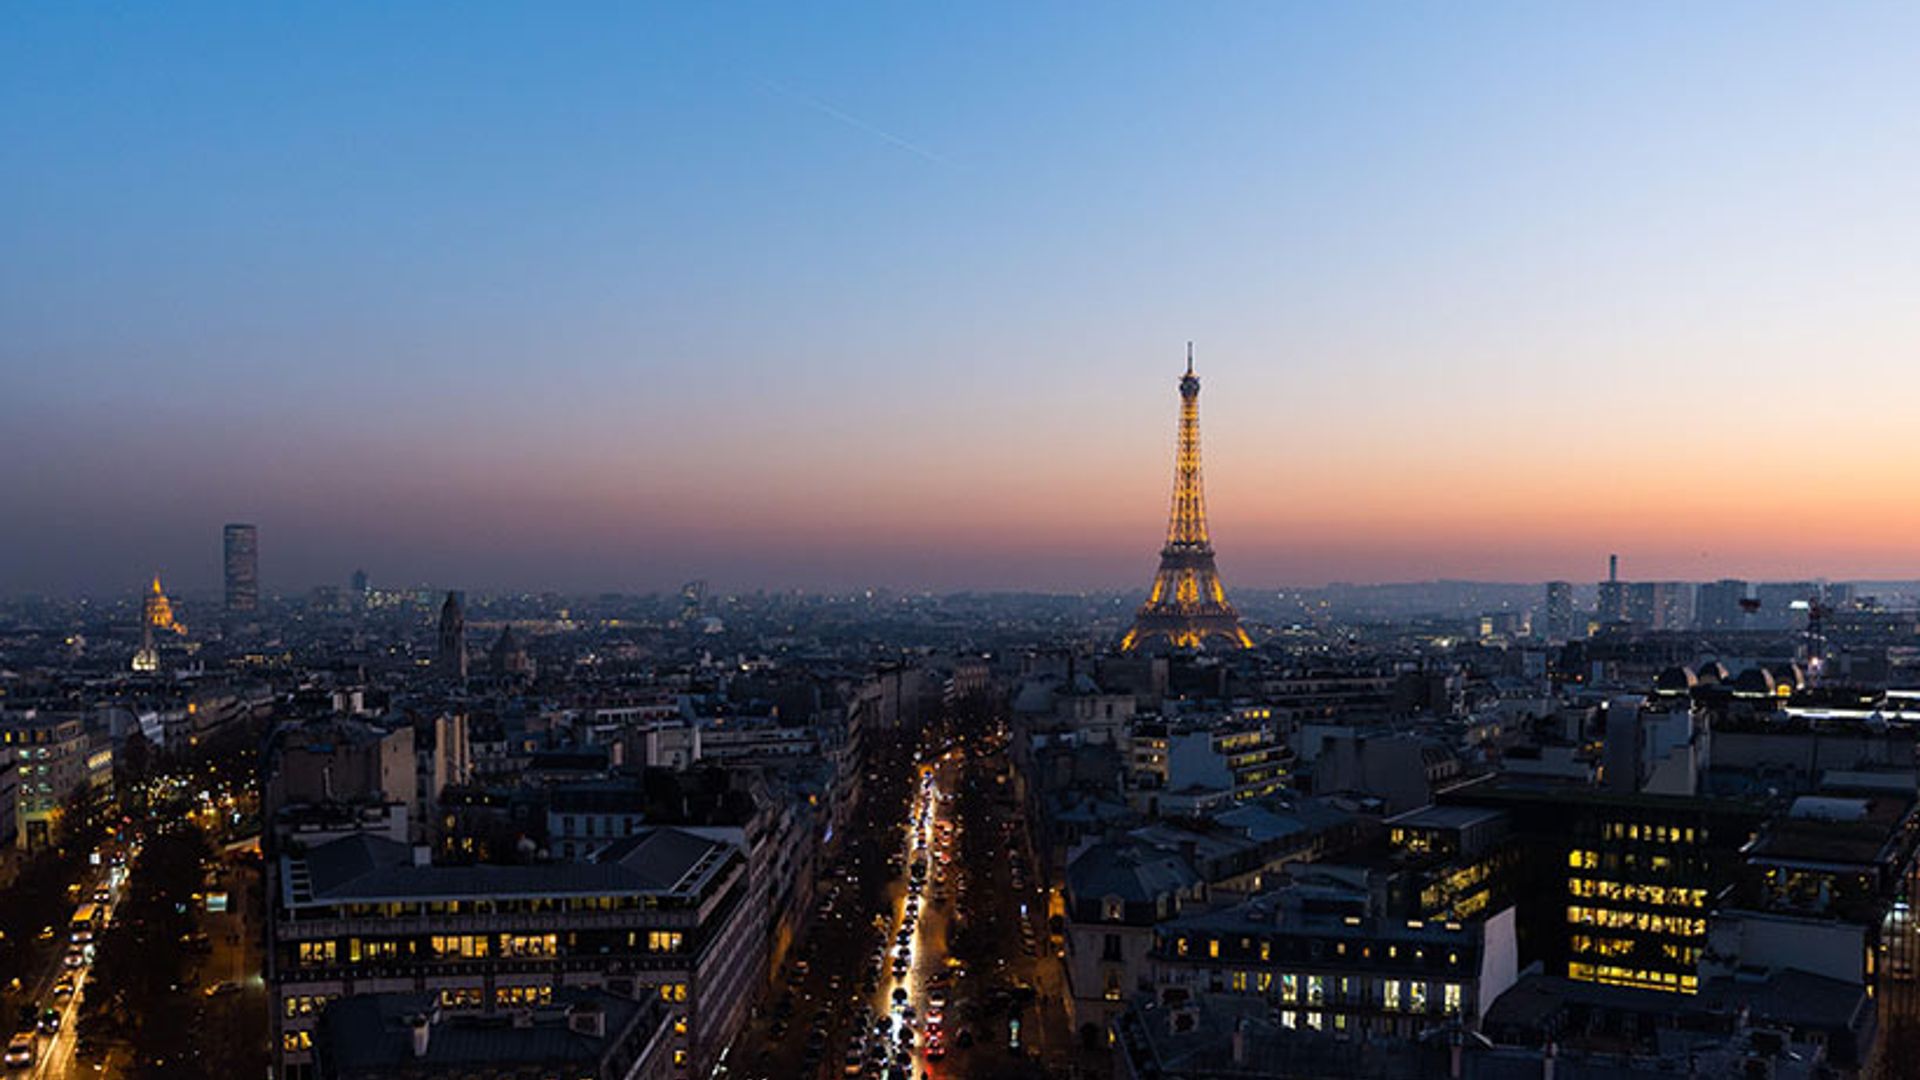 48 hours in Paris: The best things to do and see in the French capital